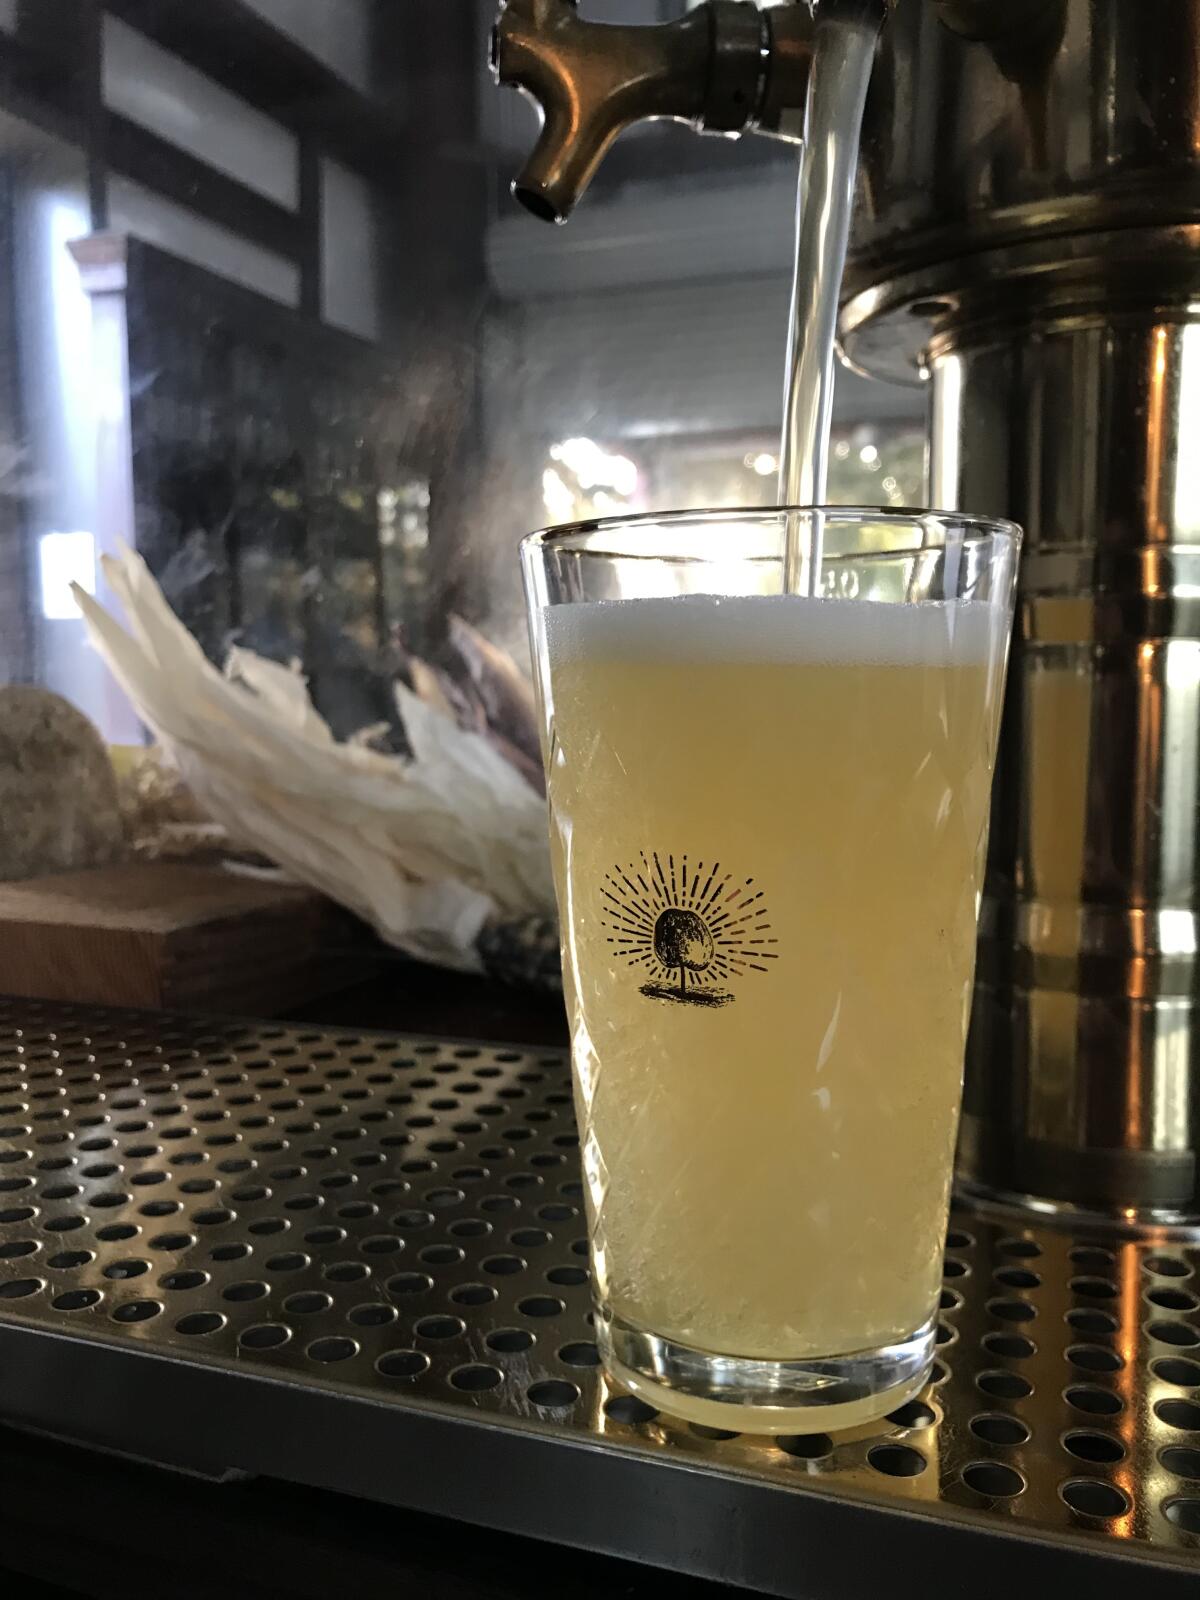 A golden cider is poured into a Calico Cidery glass from a bar tap